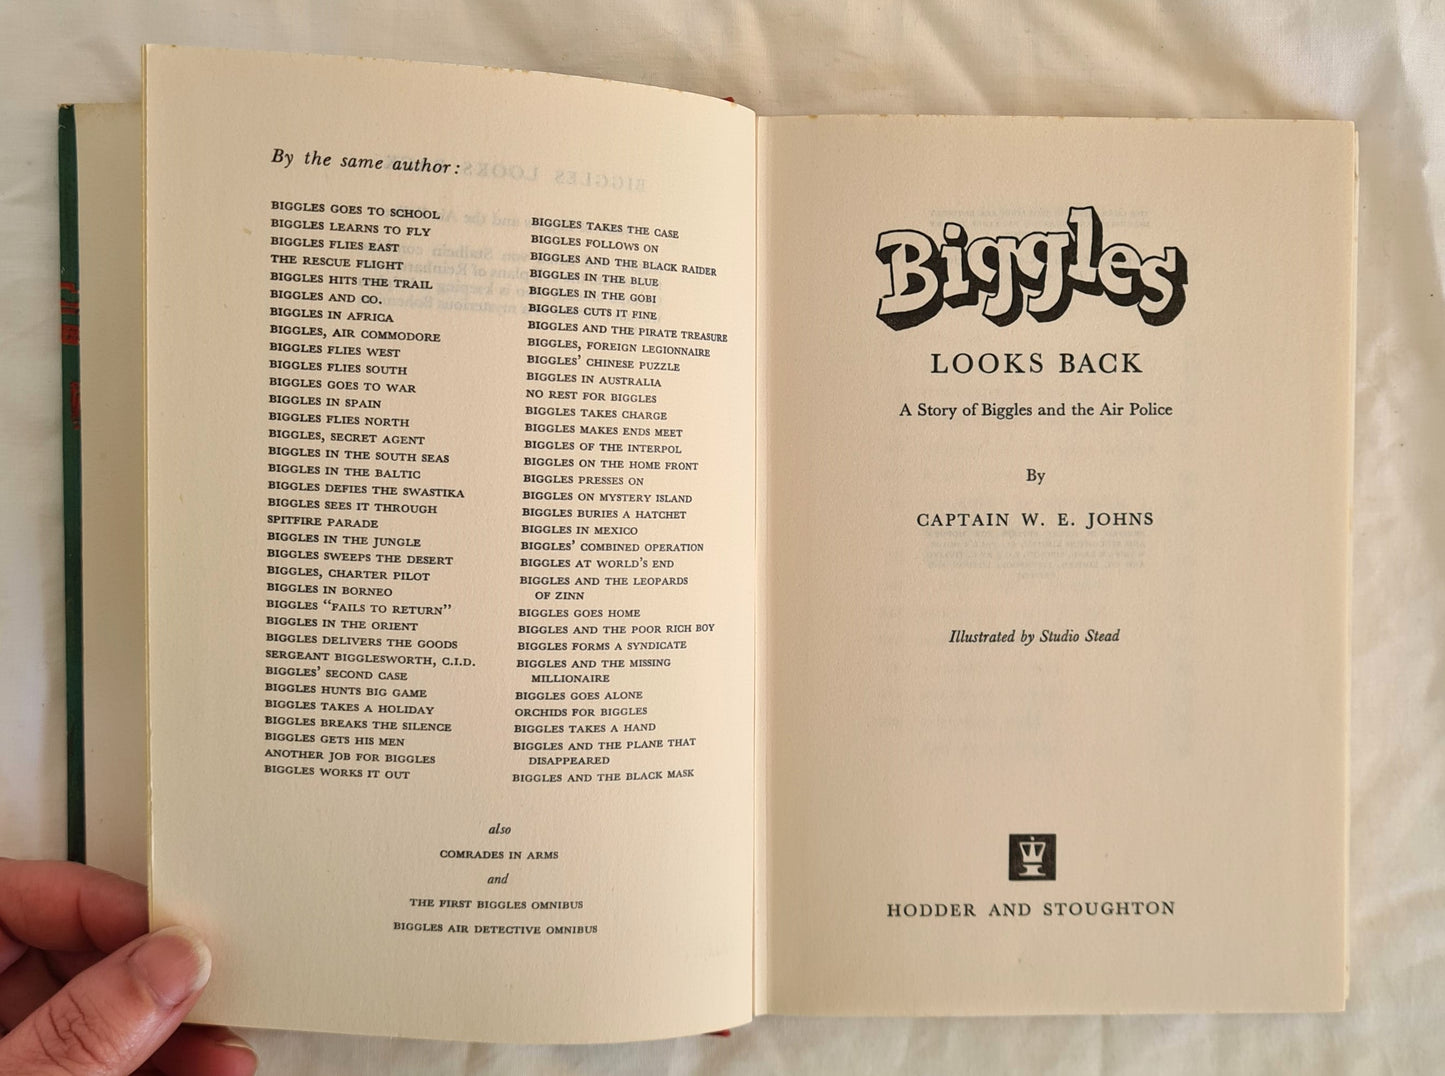 Biggles Looks Back by Captain W. E. Johns